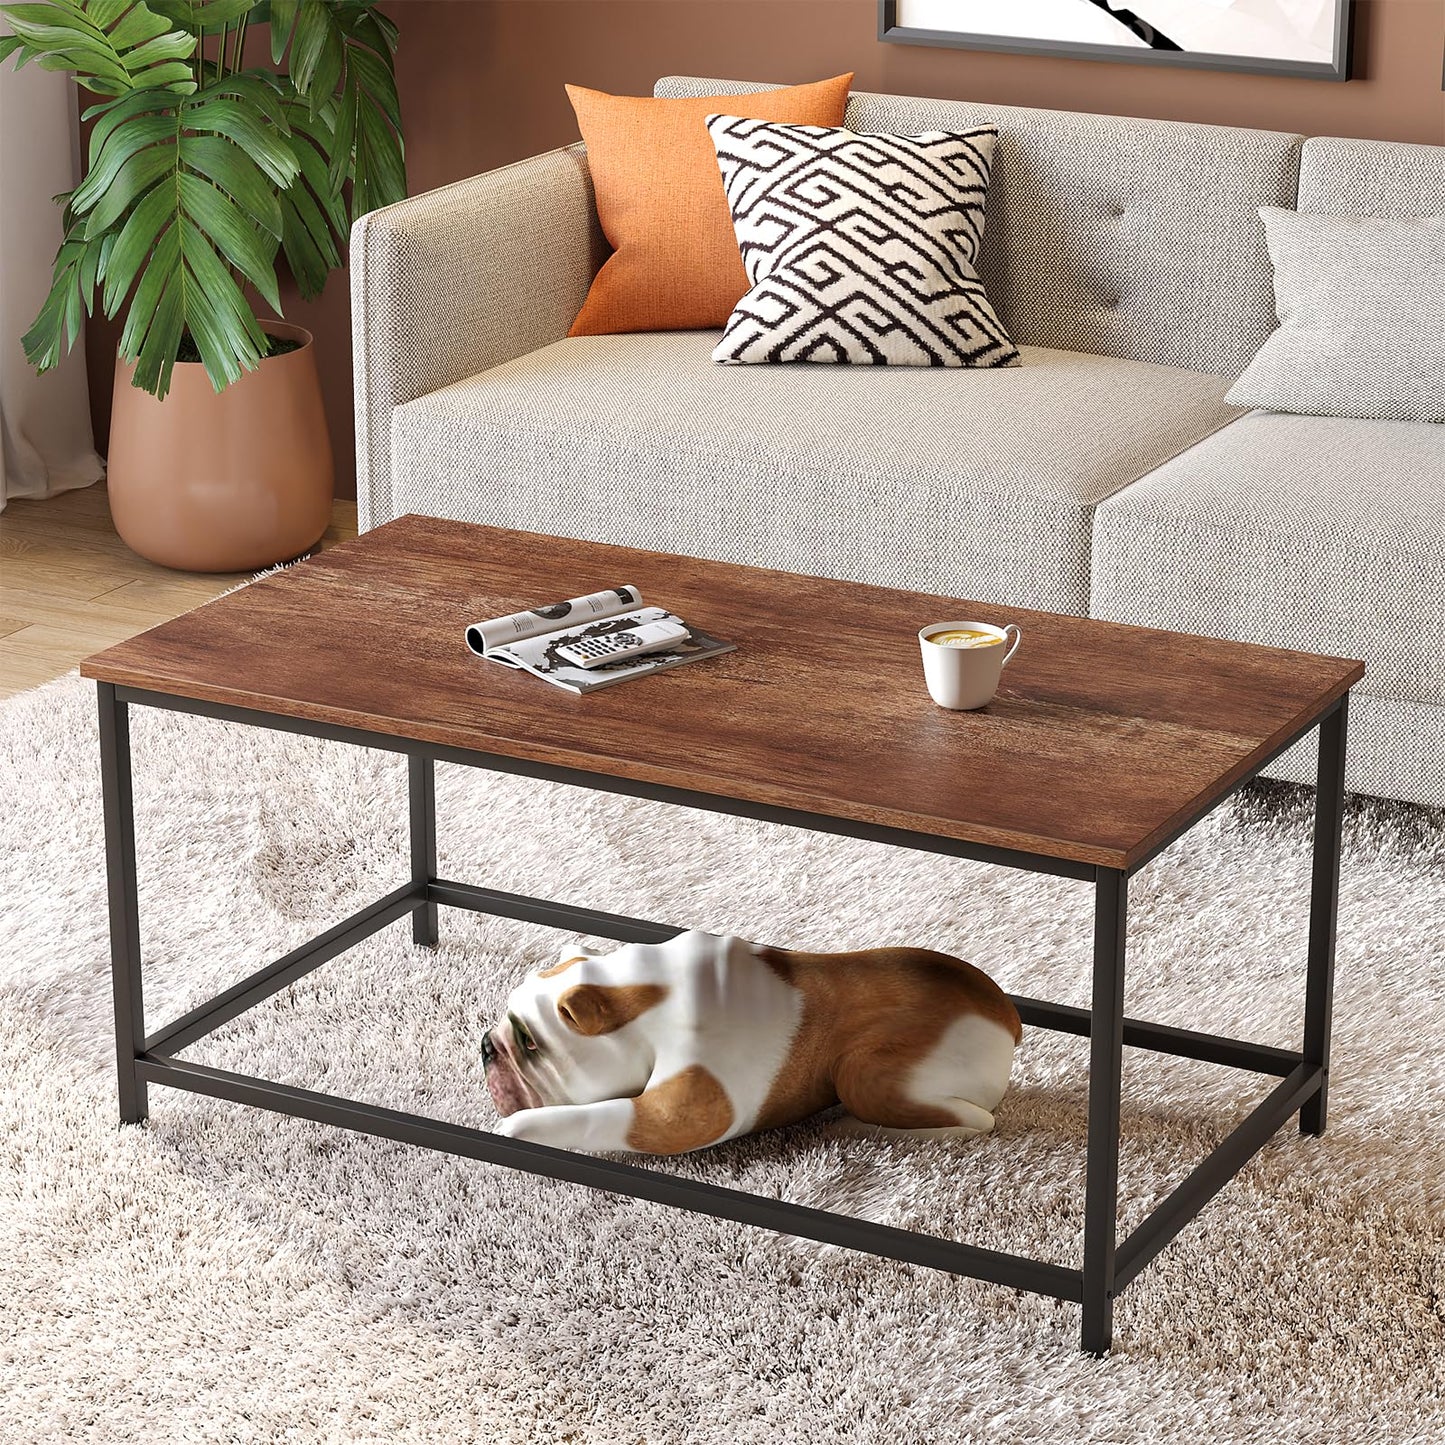 SAYGOER Coffee Table Simple Modern Rectangular Center Table Open Space Minimalist for Living Room Home Office Industrial Cocktail Tables, Dark Walnut